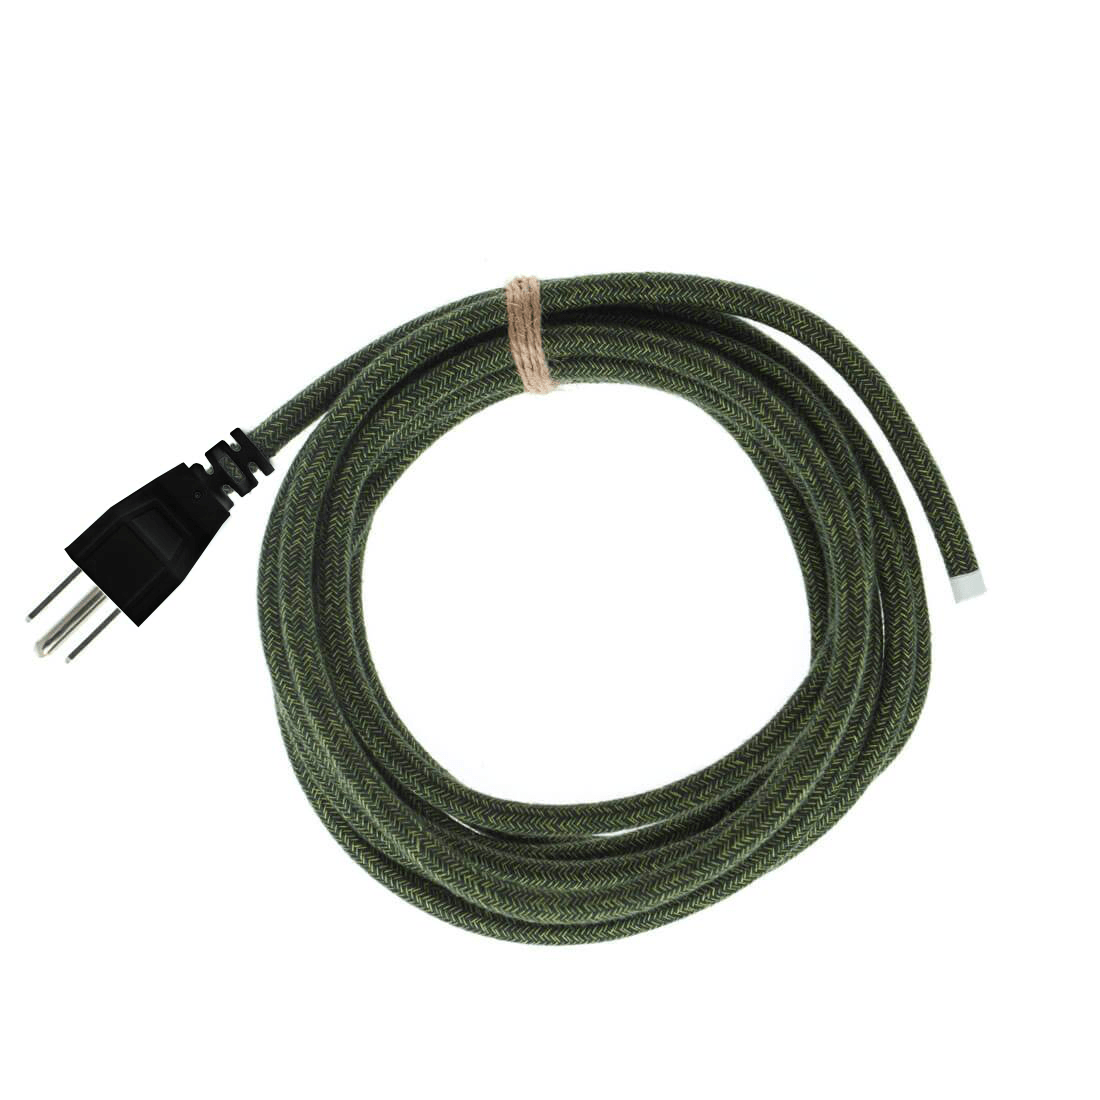 3 Prong Power Cord Whip - 15 Foot